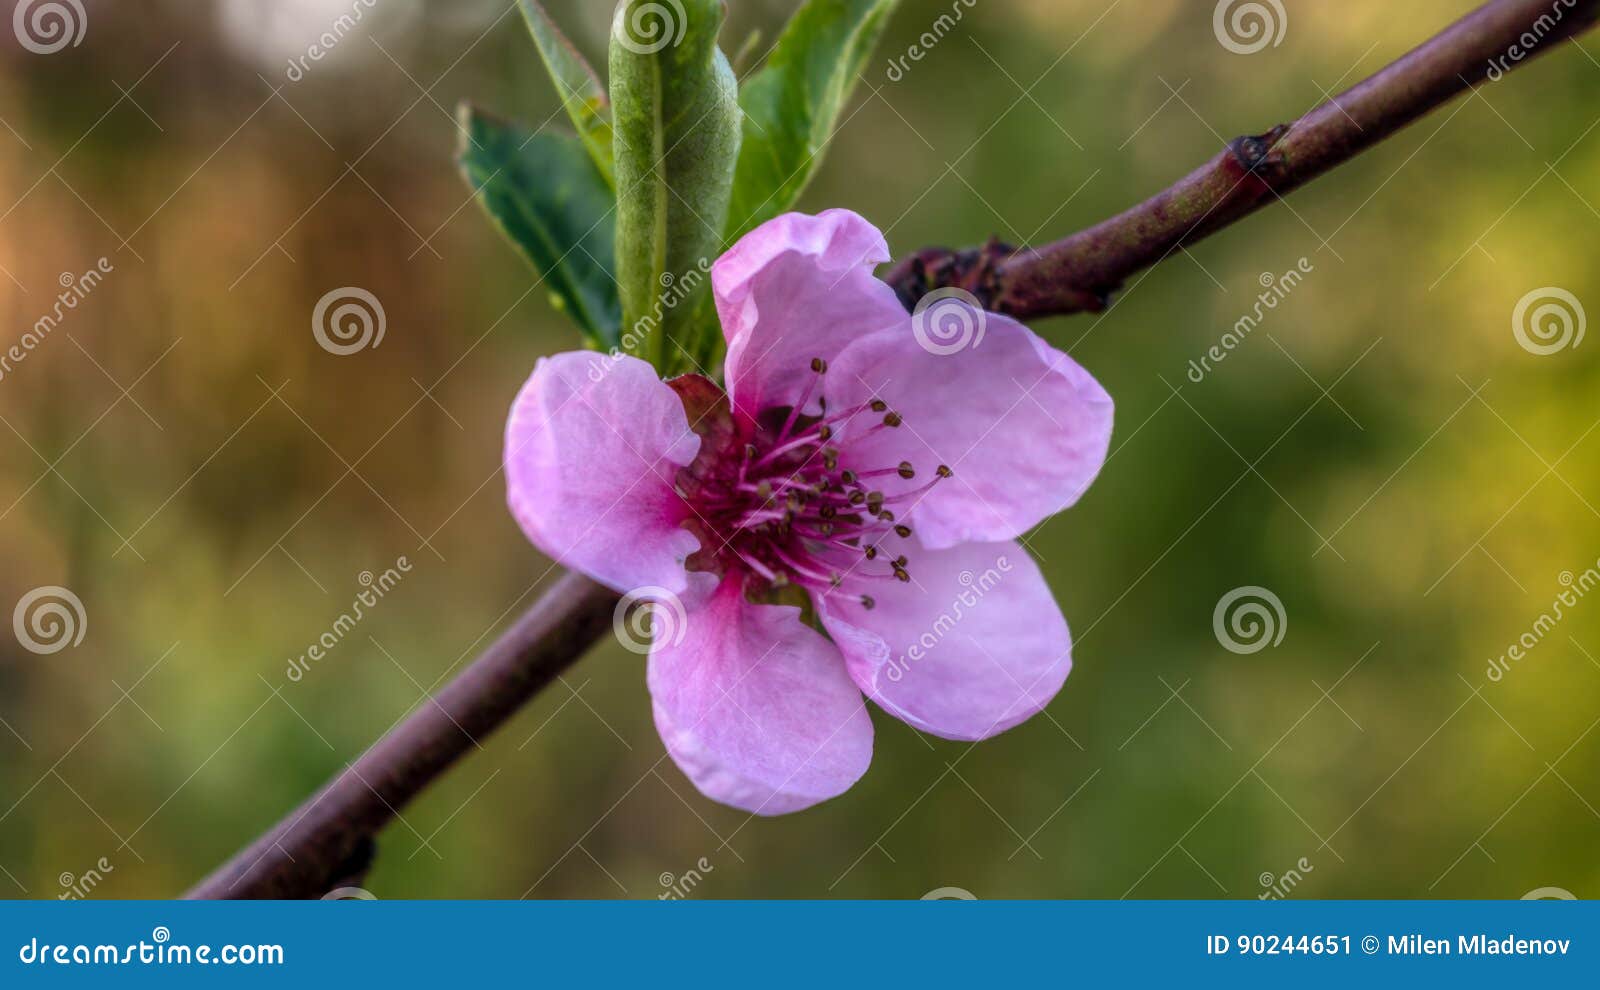 Pink blossom stock image. Image of yellow, flower, d3200 - 90244651